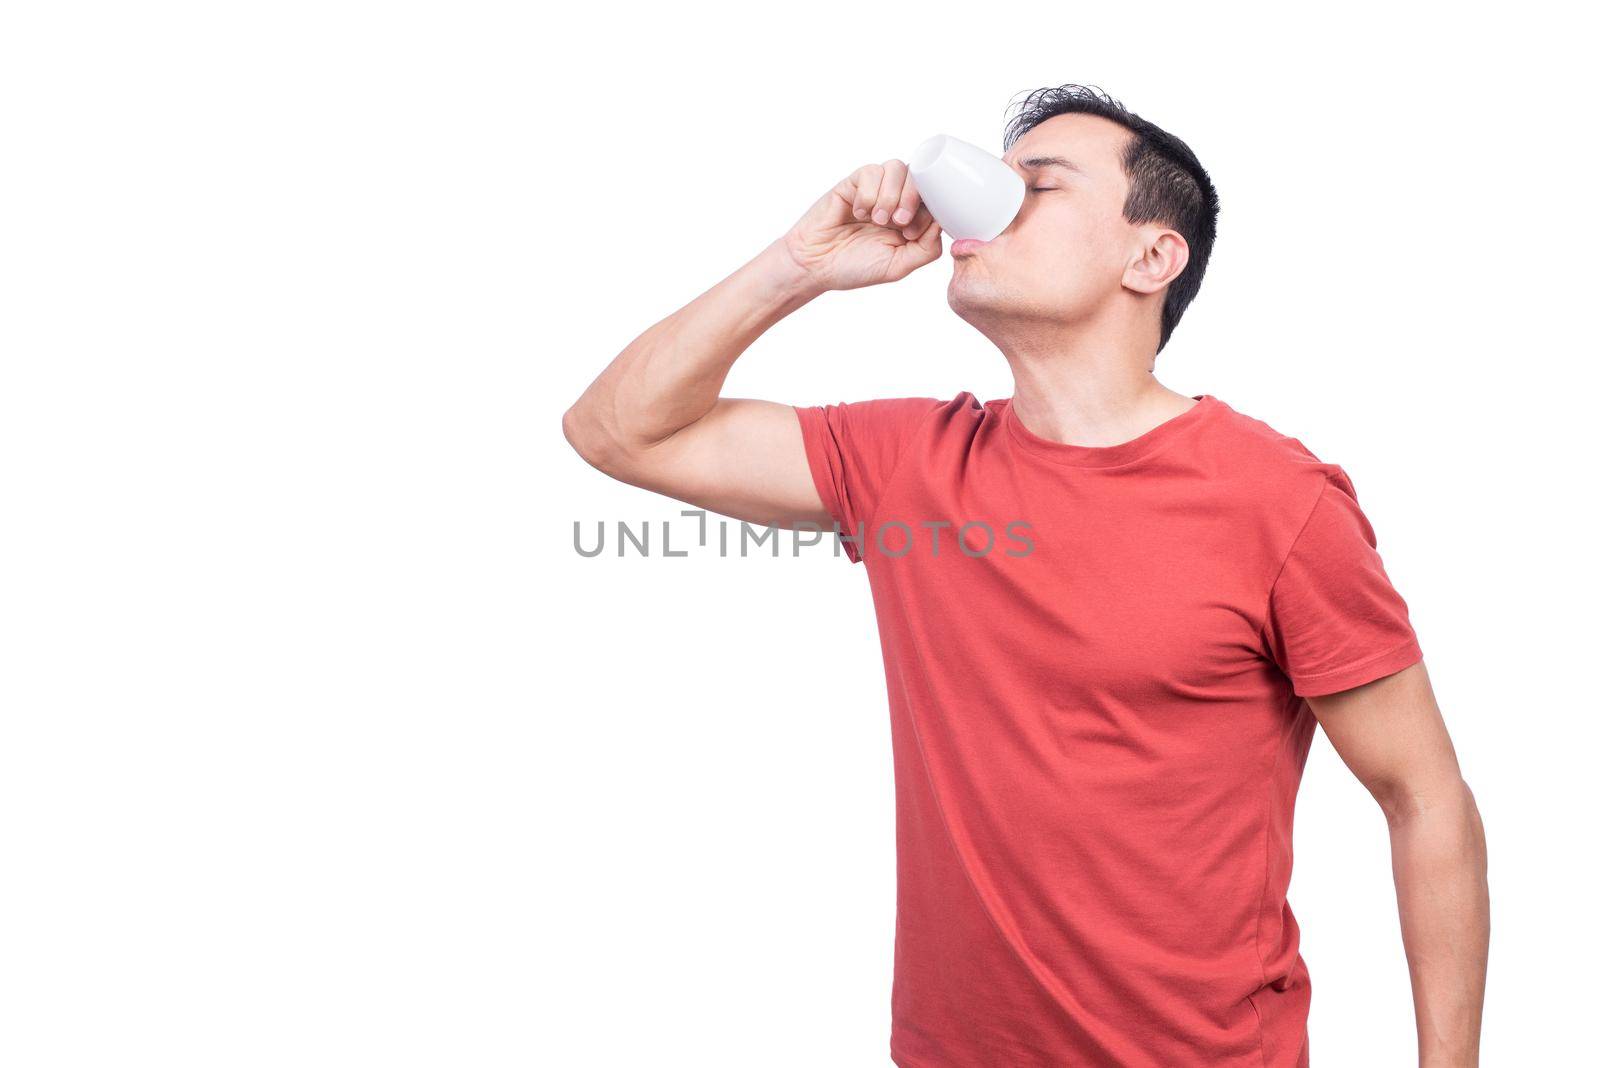 Guy drinking coffee from cup on white background by ivanmoreno